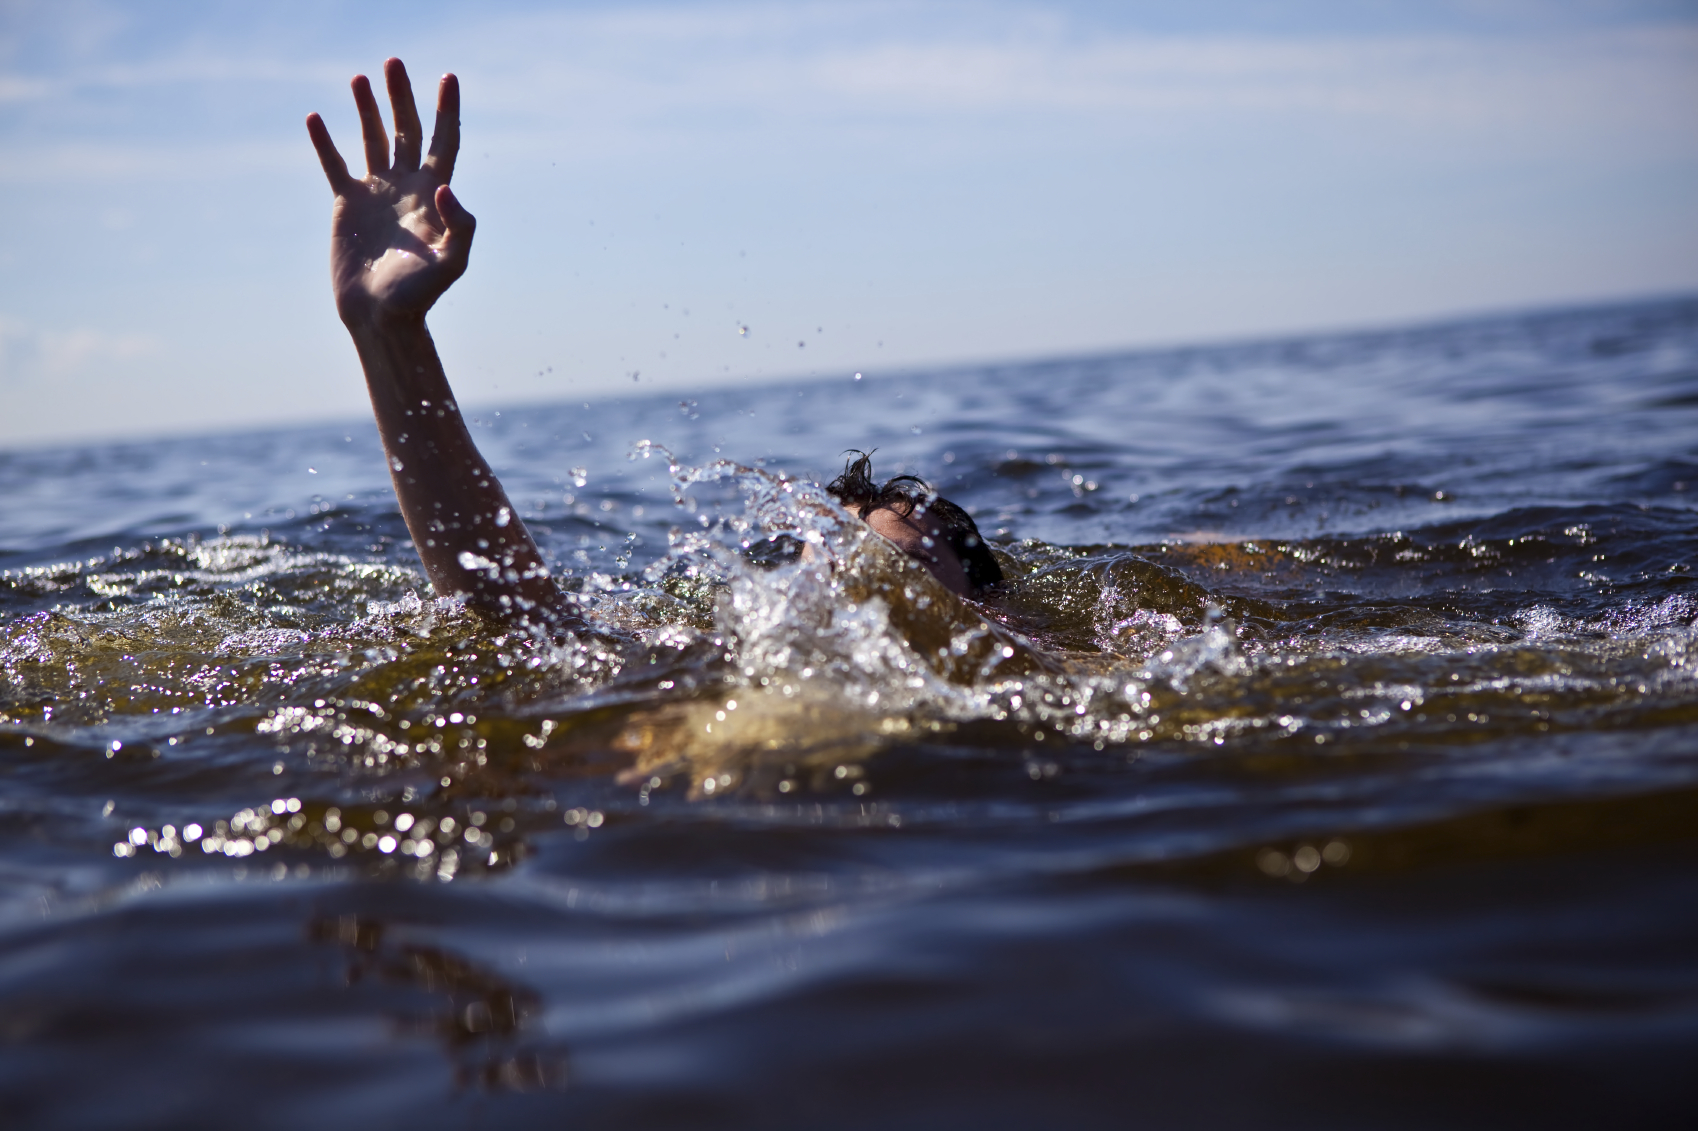 Swim Safely: Know the 8 Warning Signs of Drowning